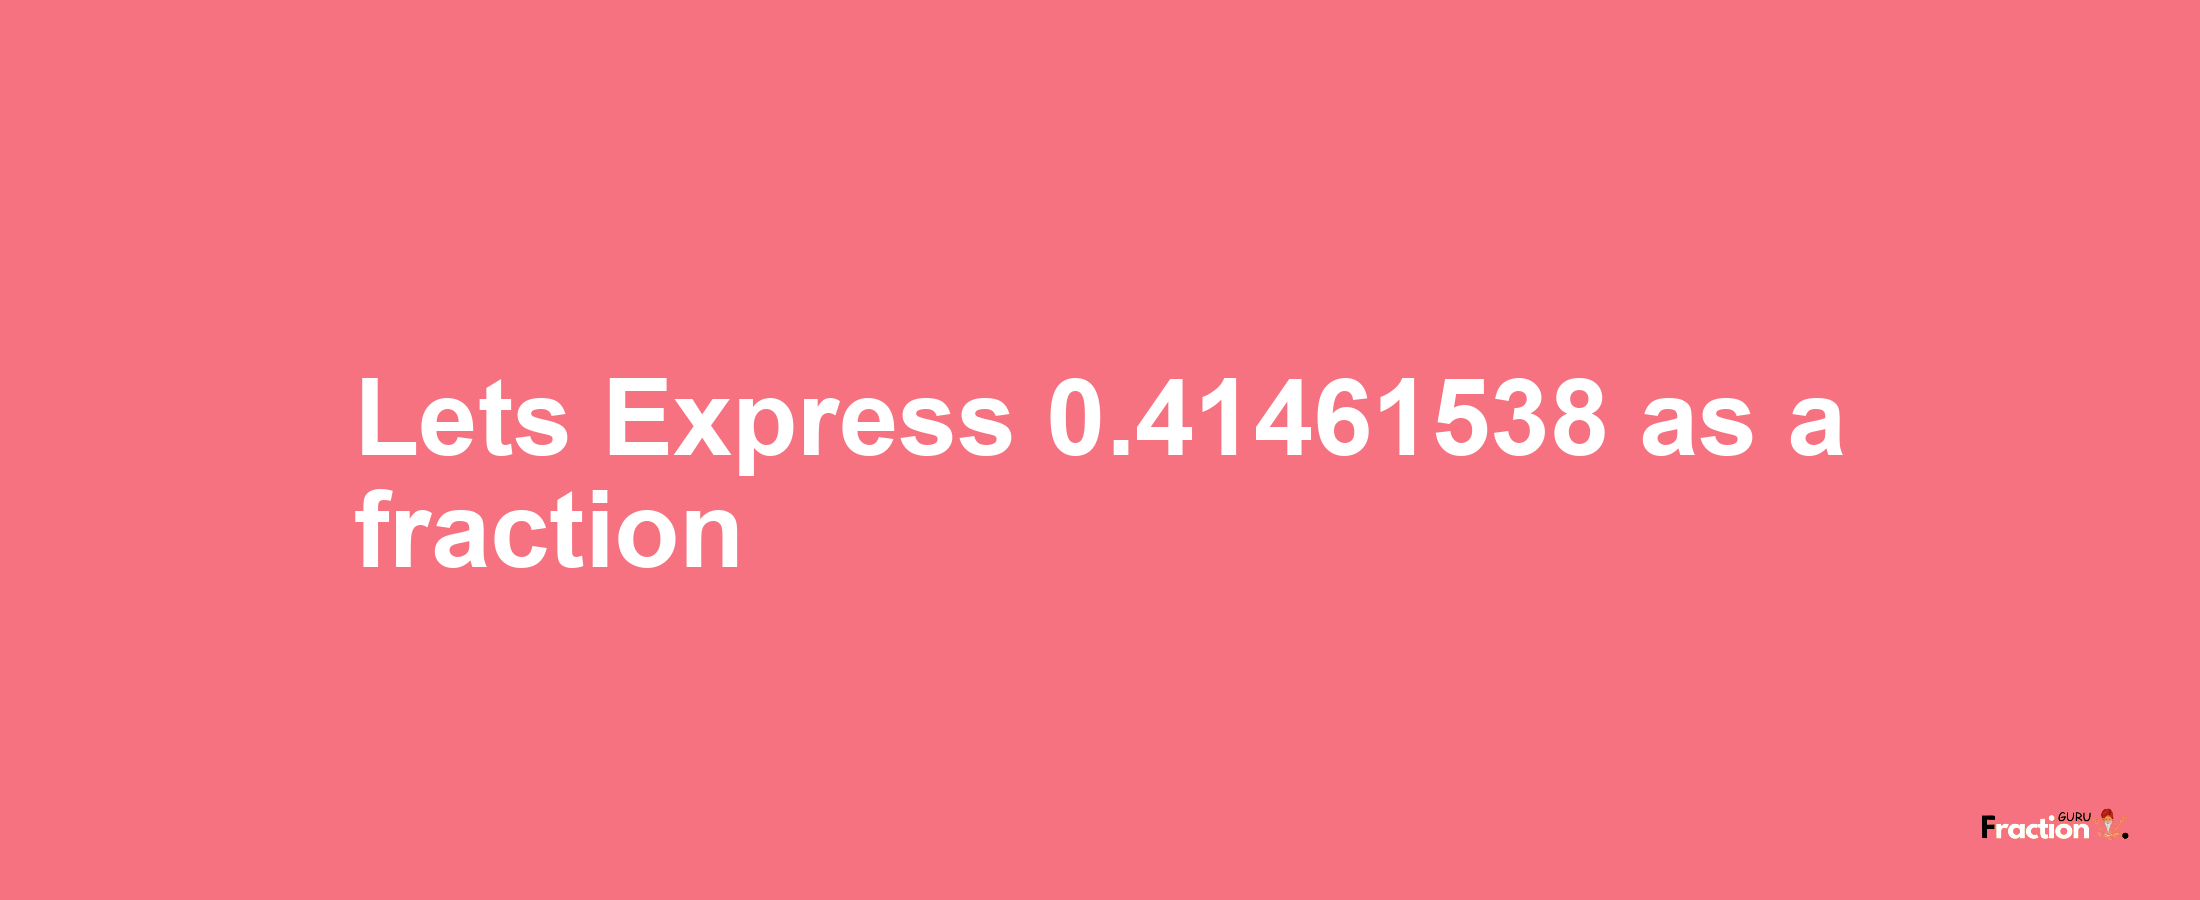 Lets Express 0.41461538 as afraction